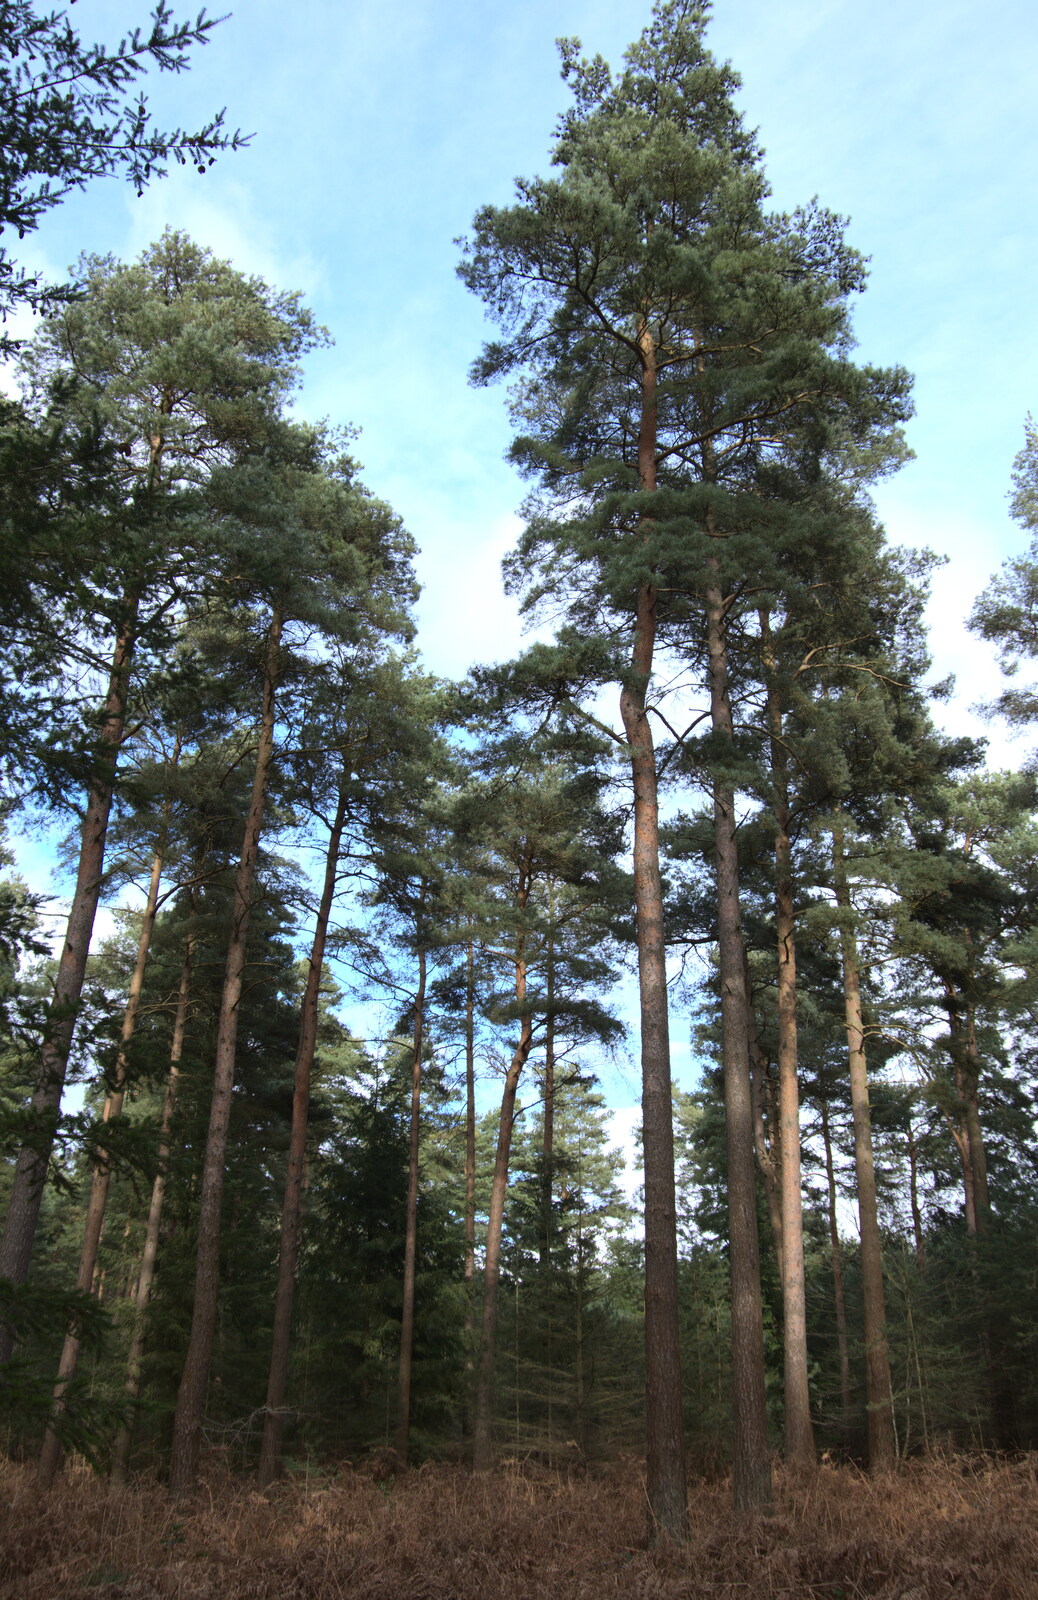 The trees of Brandon forest from A Trip to High Lodge, Brandon, Suffolk - 7th March 2020